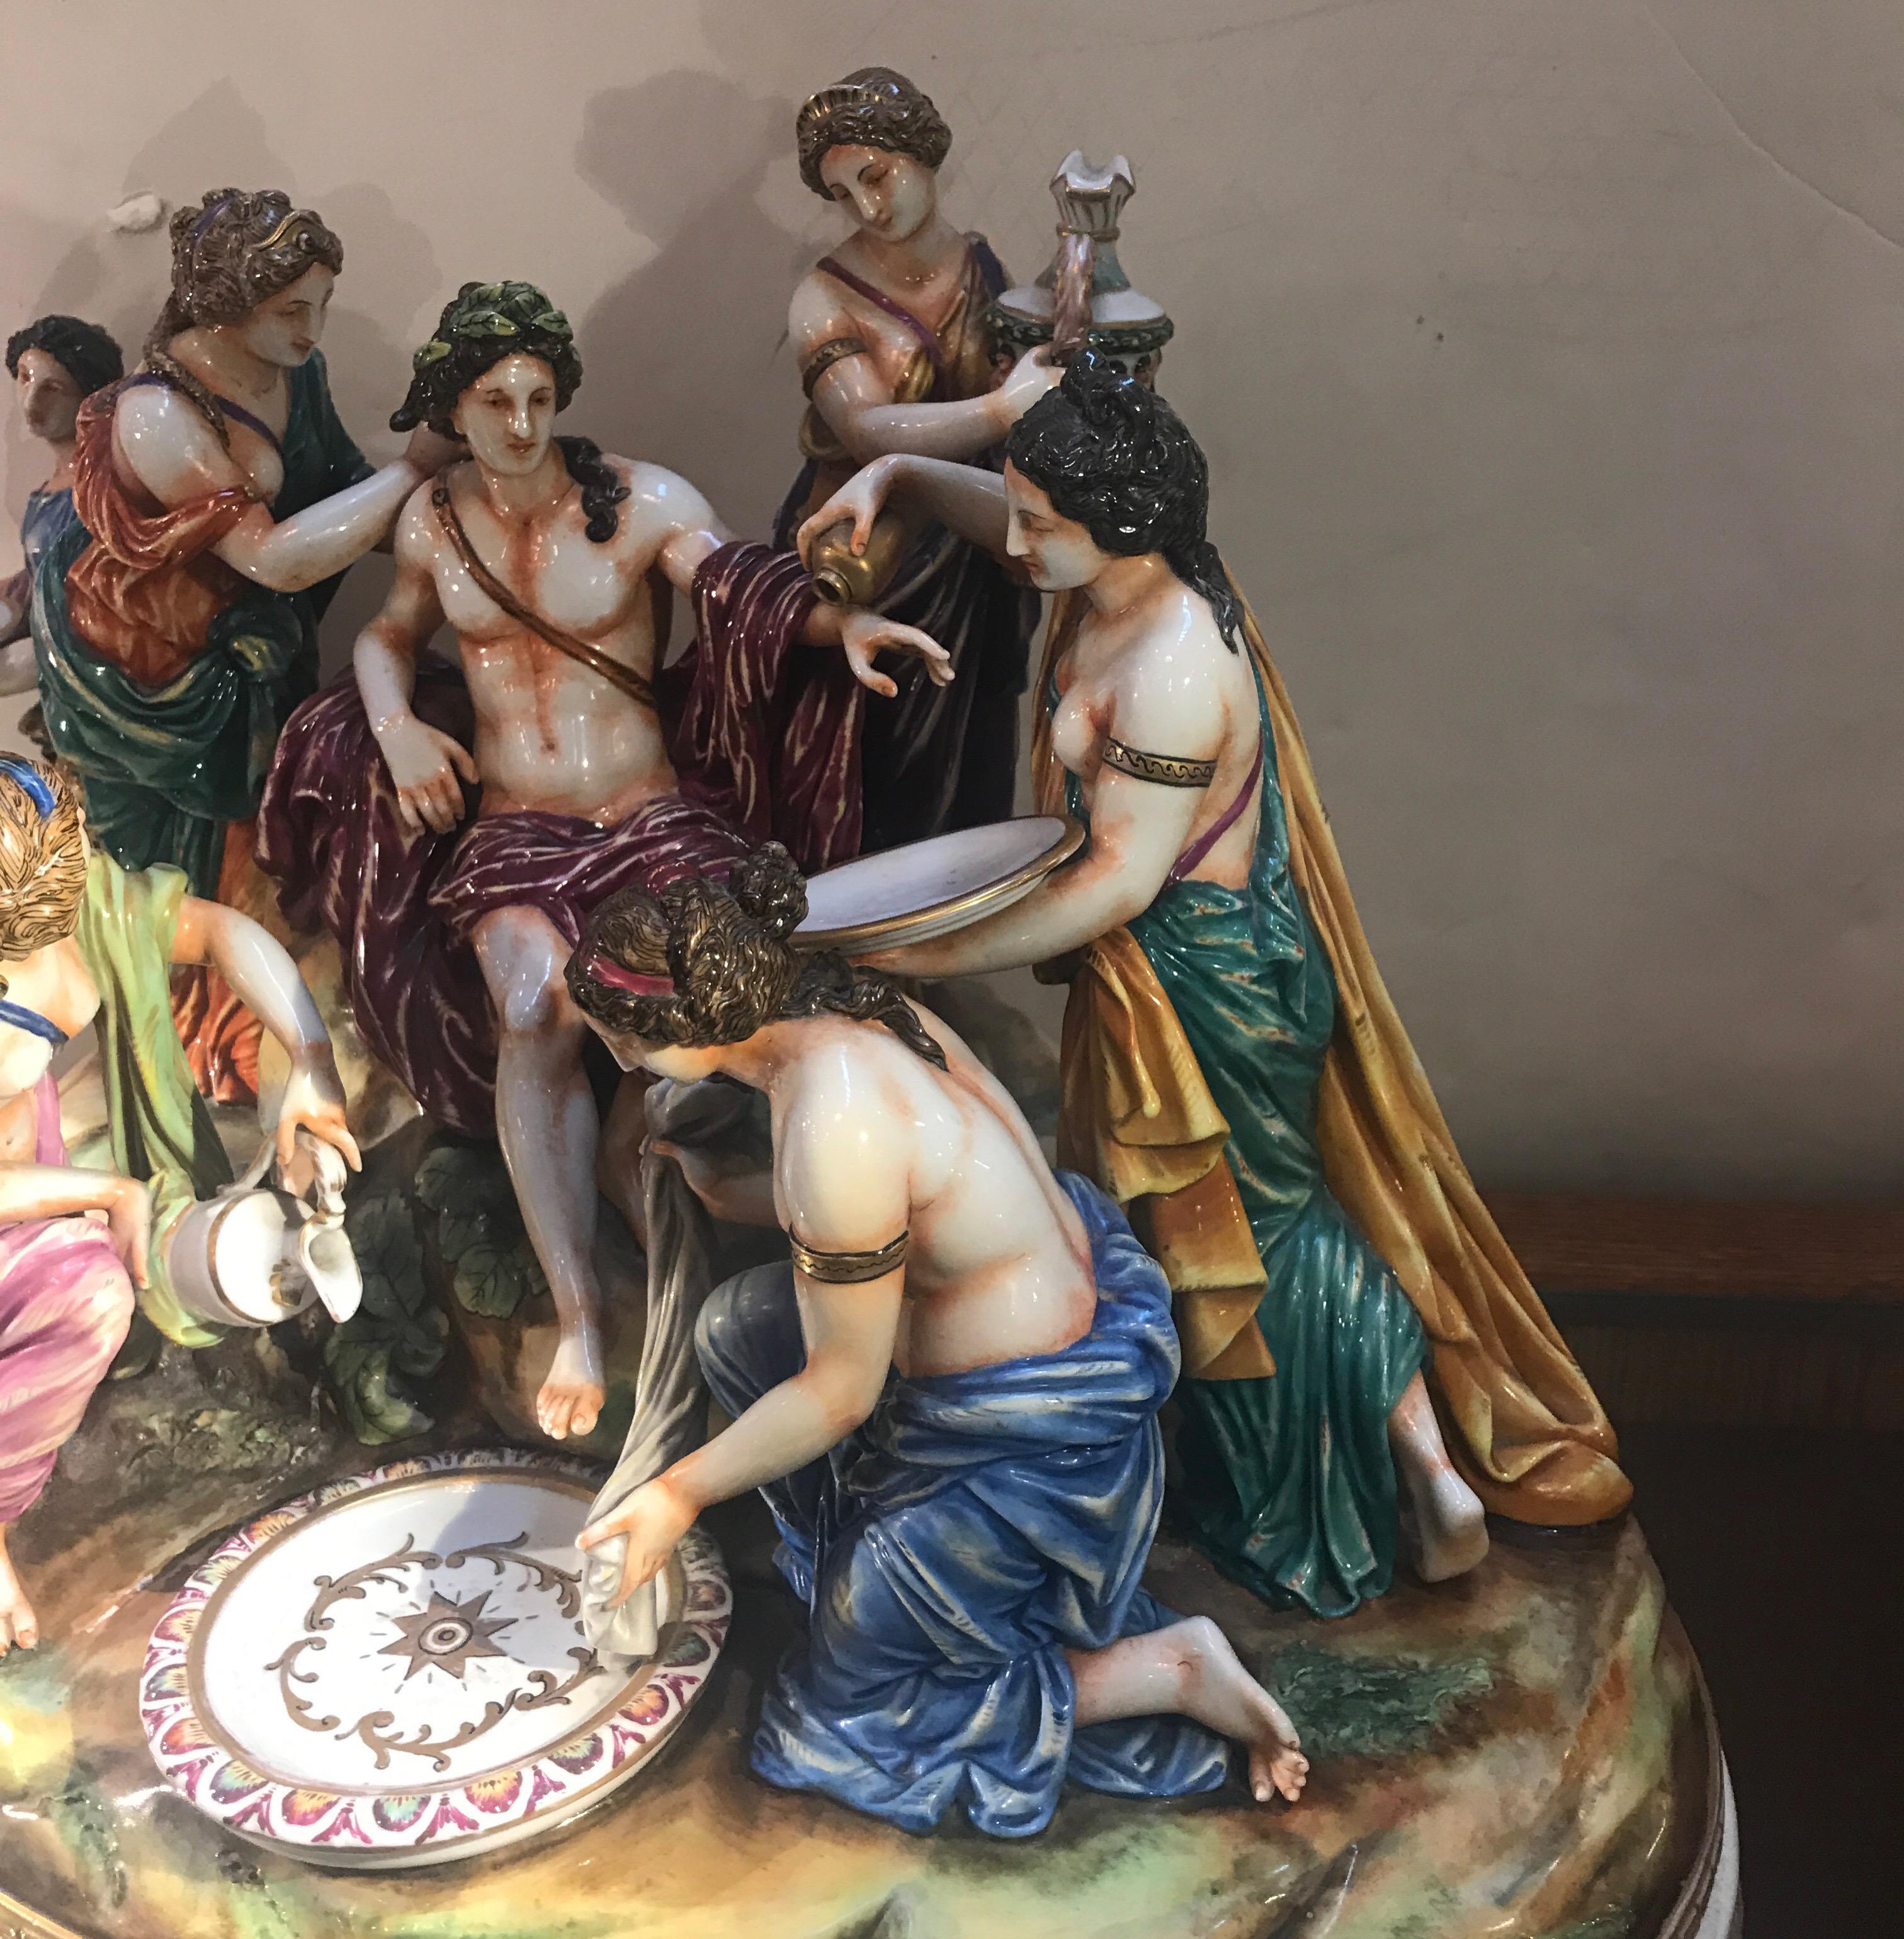 Impressive and large multi figurative porcelain sculpture of a Greek man surrounded by six Greek maidens on a large oval base. Vibrant and highly detailed with gilt highlights. Marked on the lower back, blue under-glaze with the capodimonte mark.